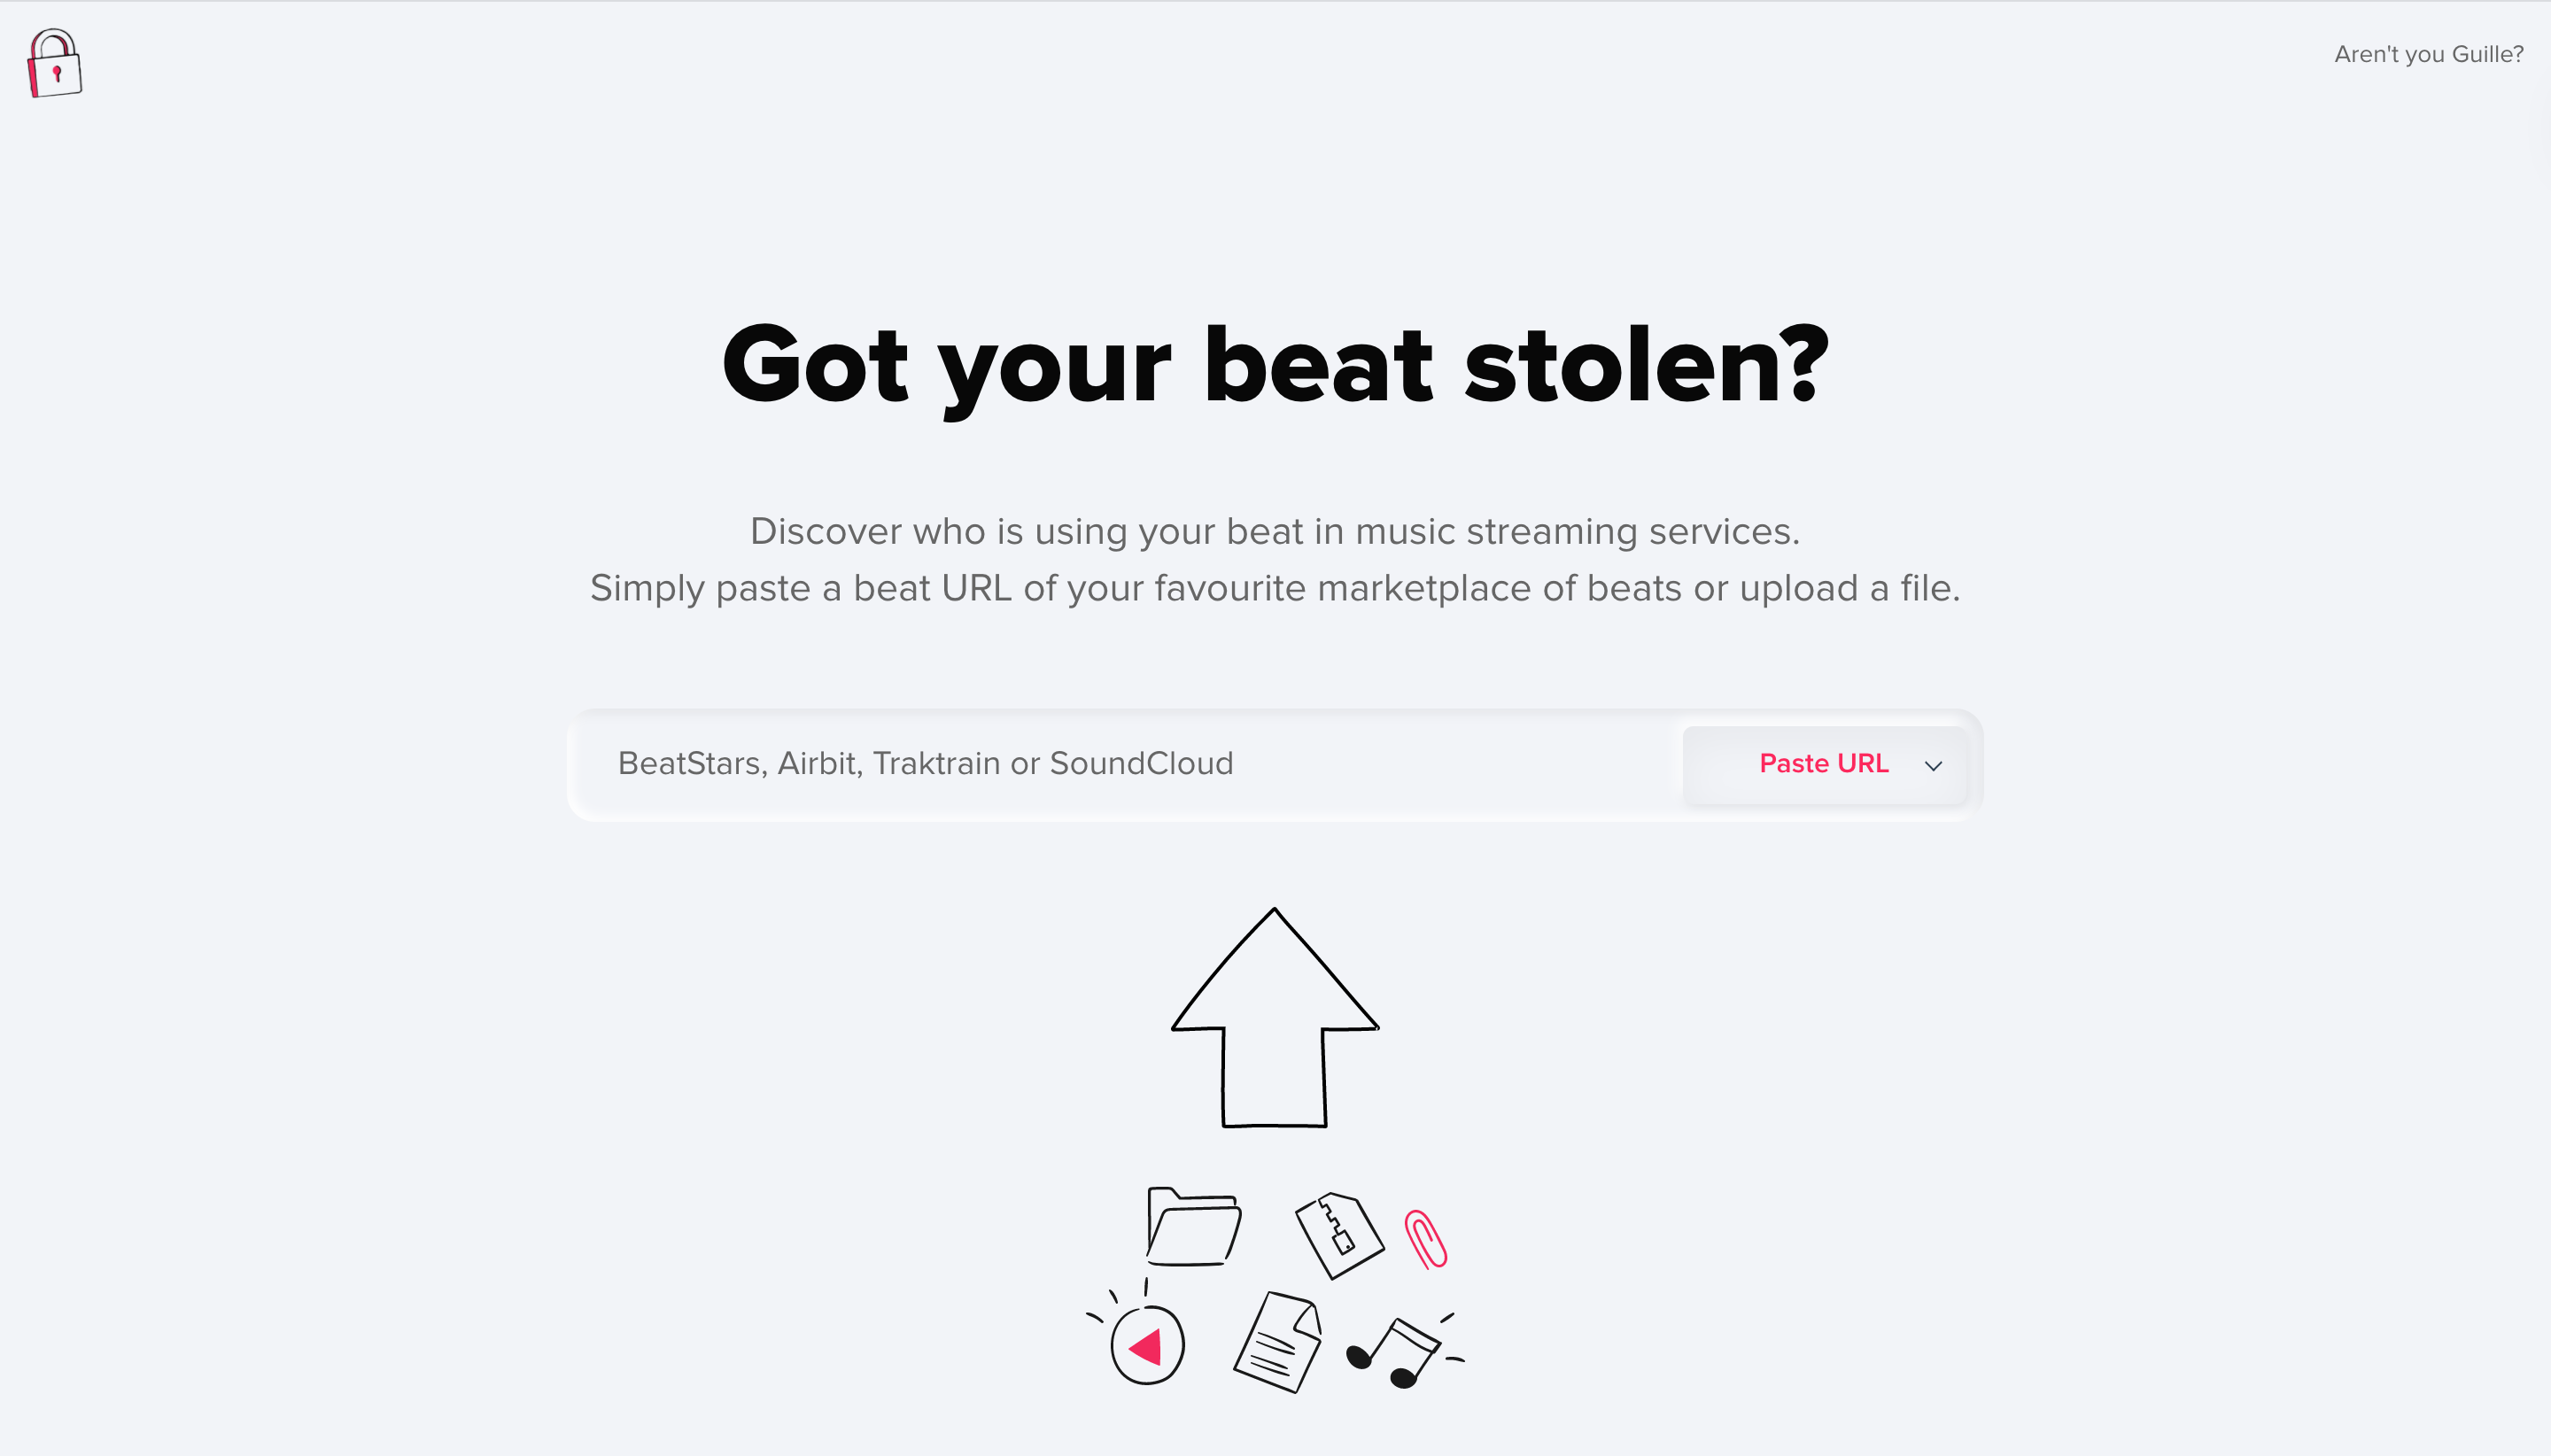 - Discover who is using your beat music streaming